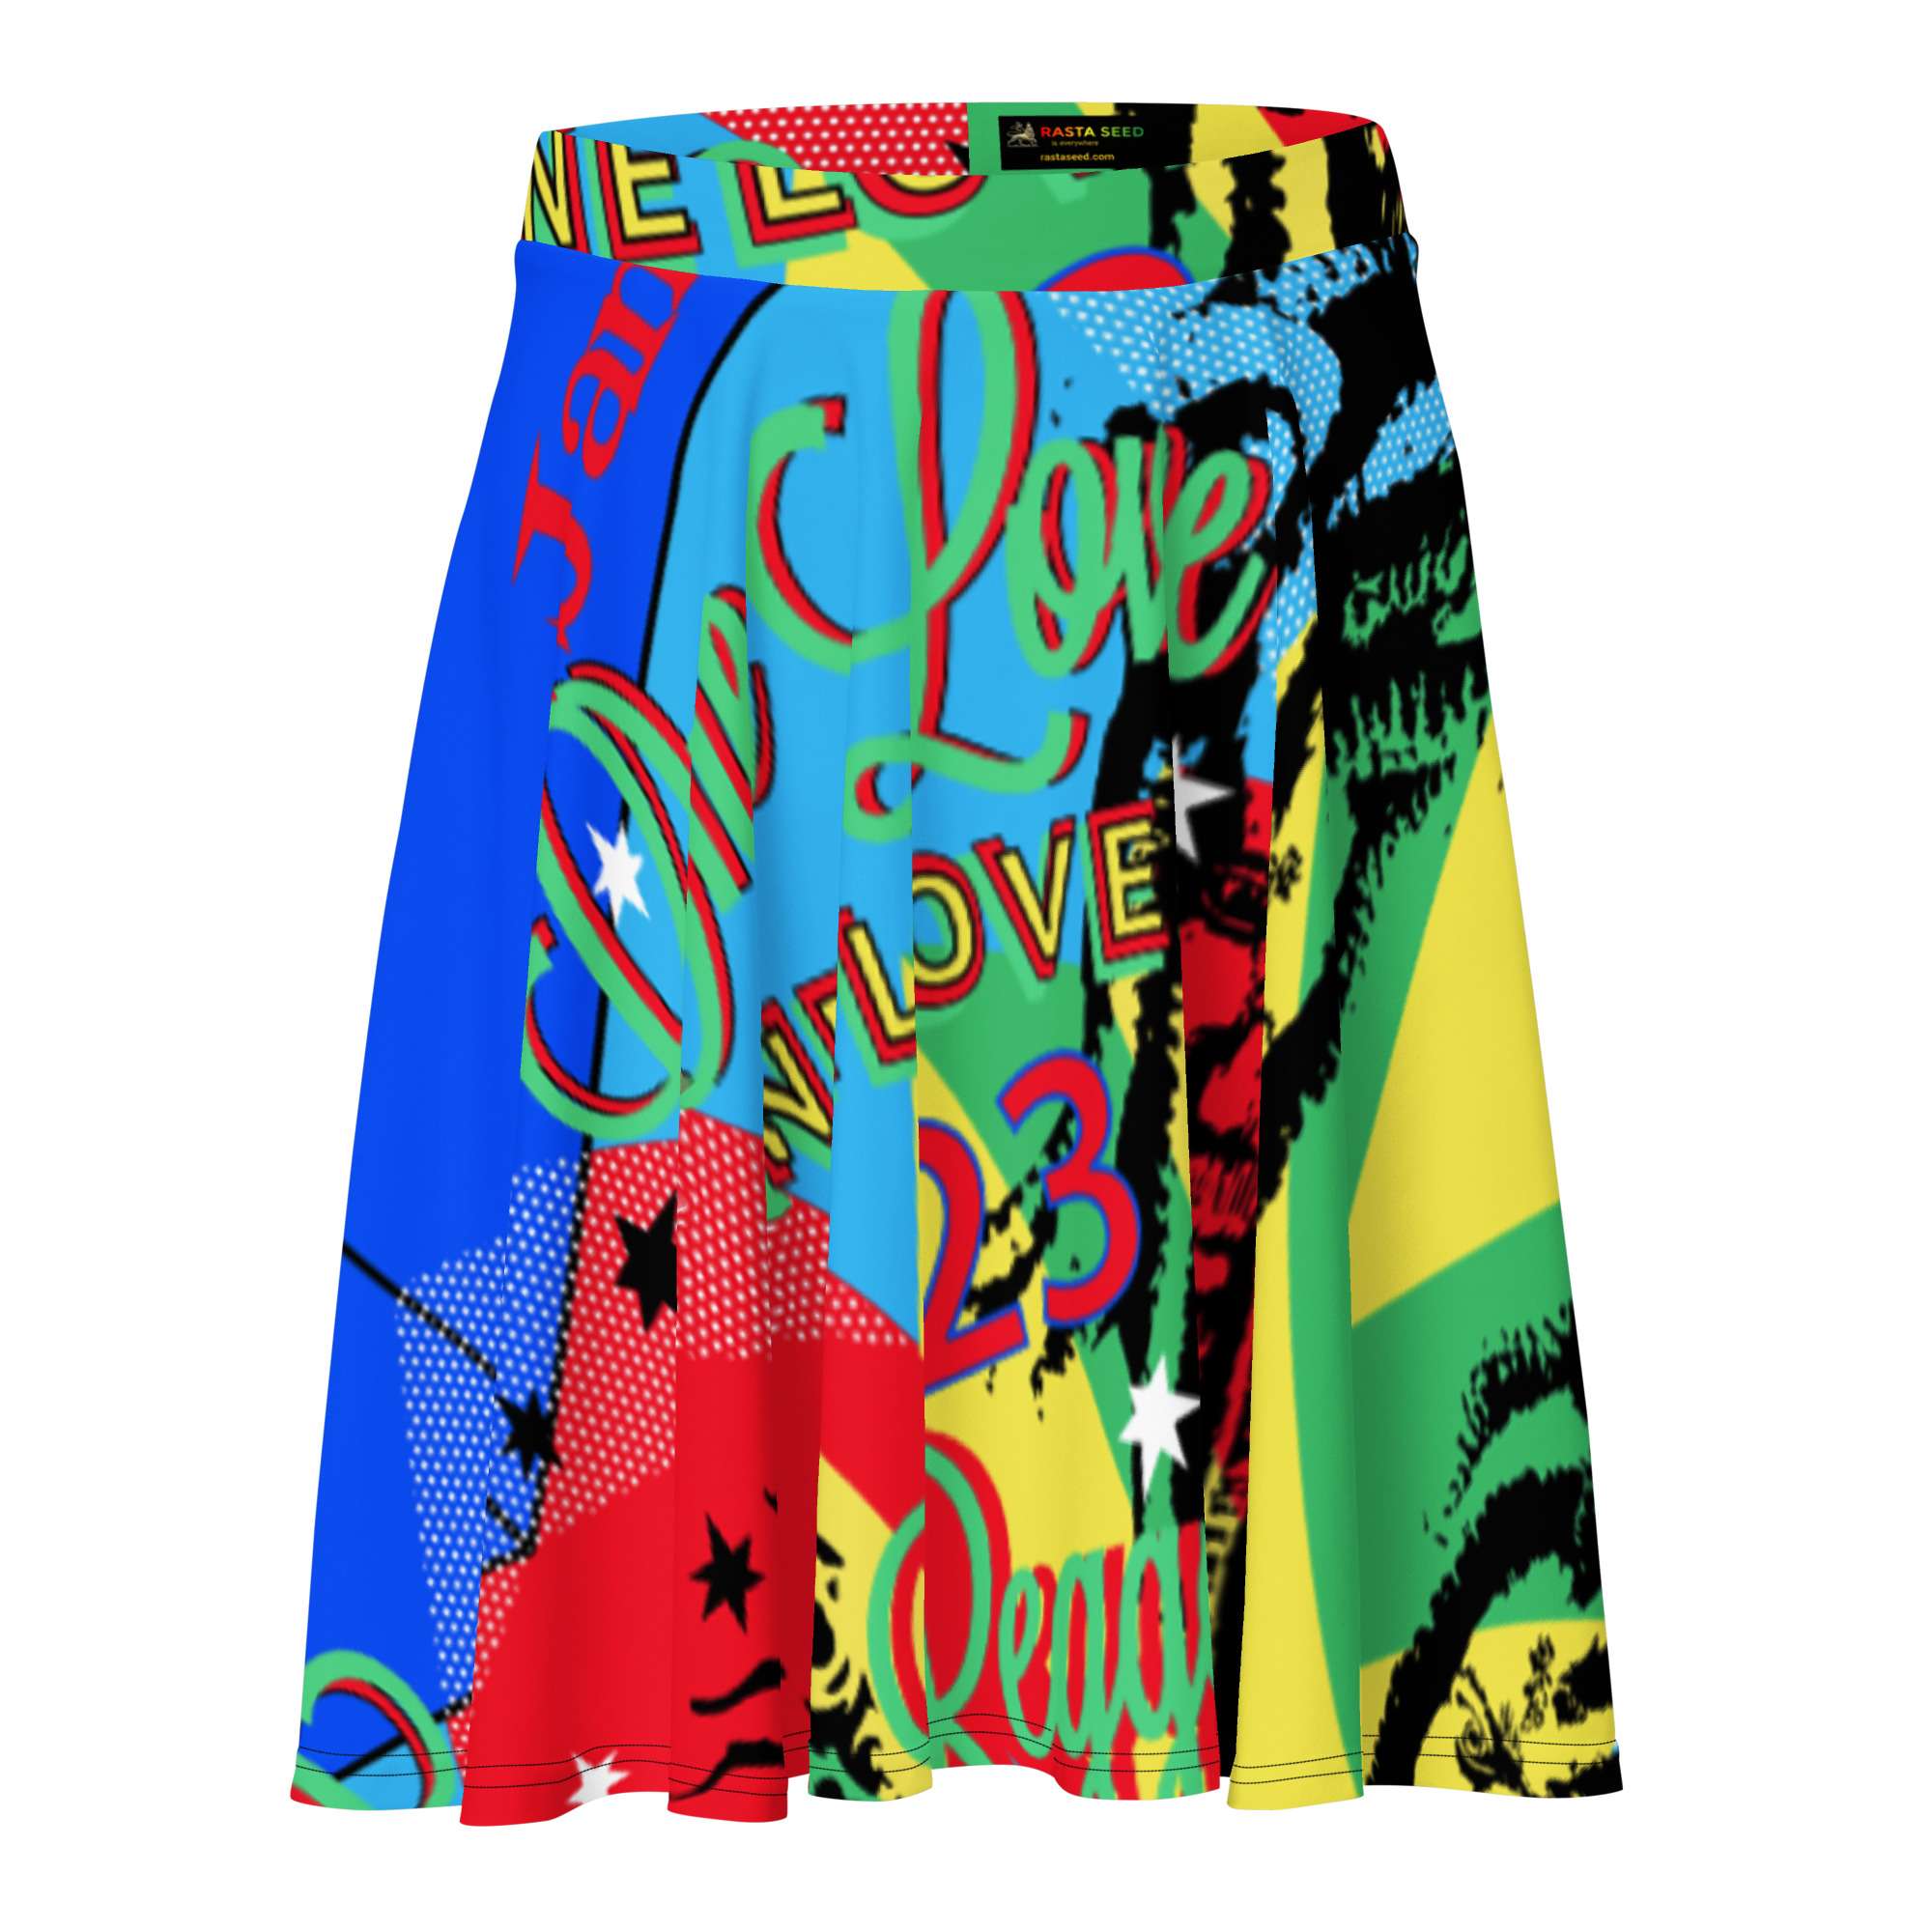 One Love Reggae Party Skater Skirt right full circle view front view